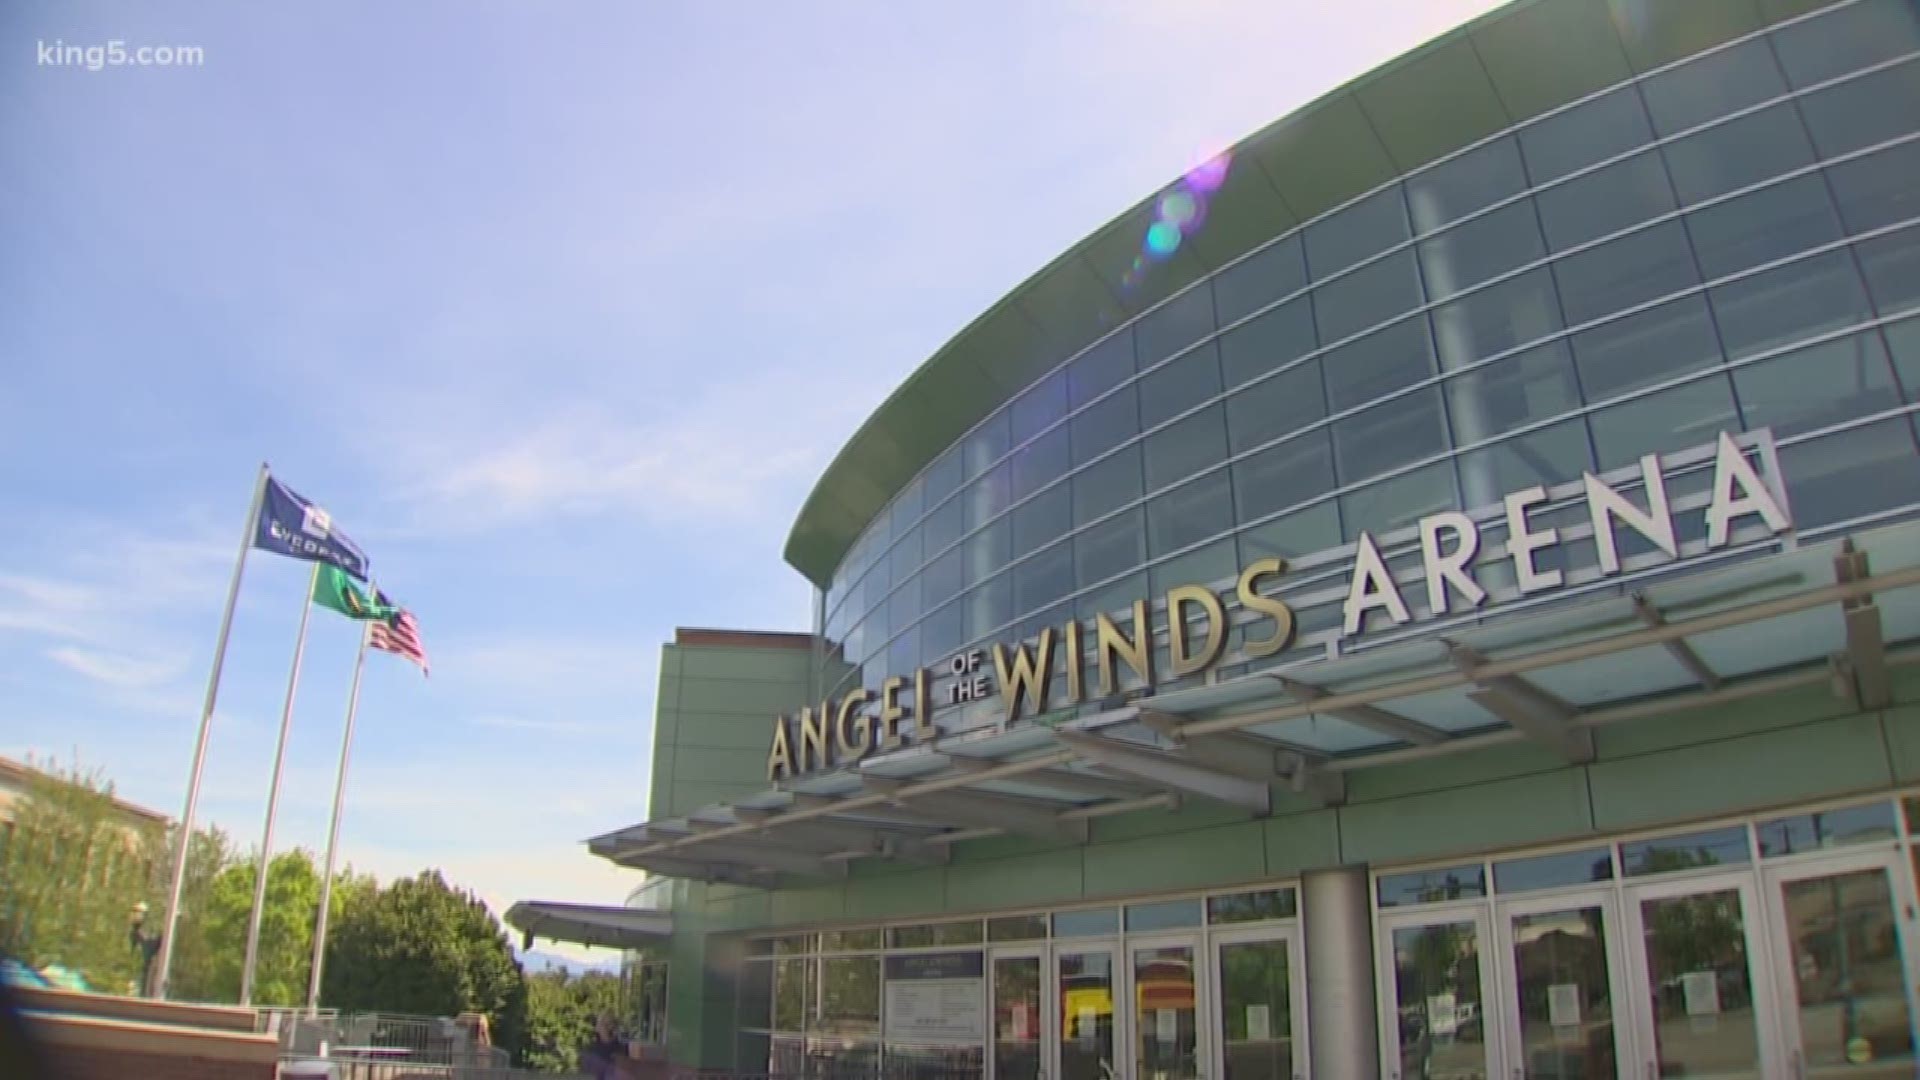 The Seattle Storm, will play ball in Everett while their home venue is renovated. The city is happy to host women's basketball and enjoy it's time in the spotlight. KING 5'S Sebastian Robertson reports.